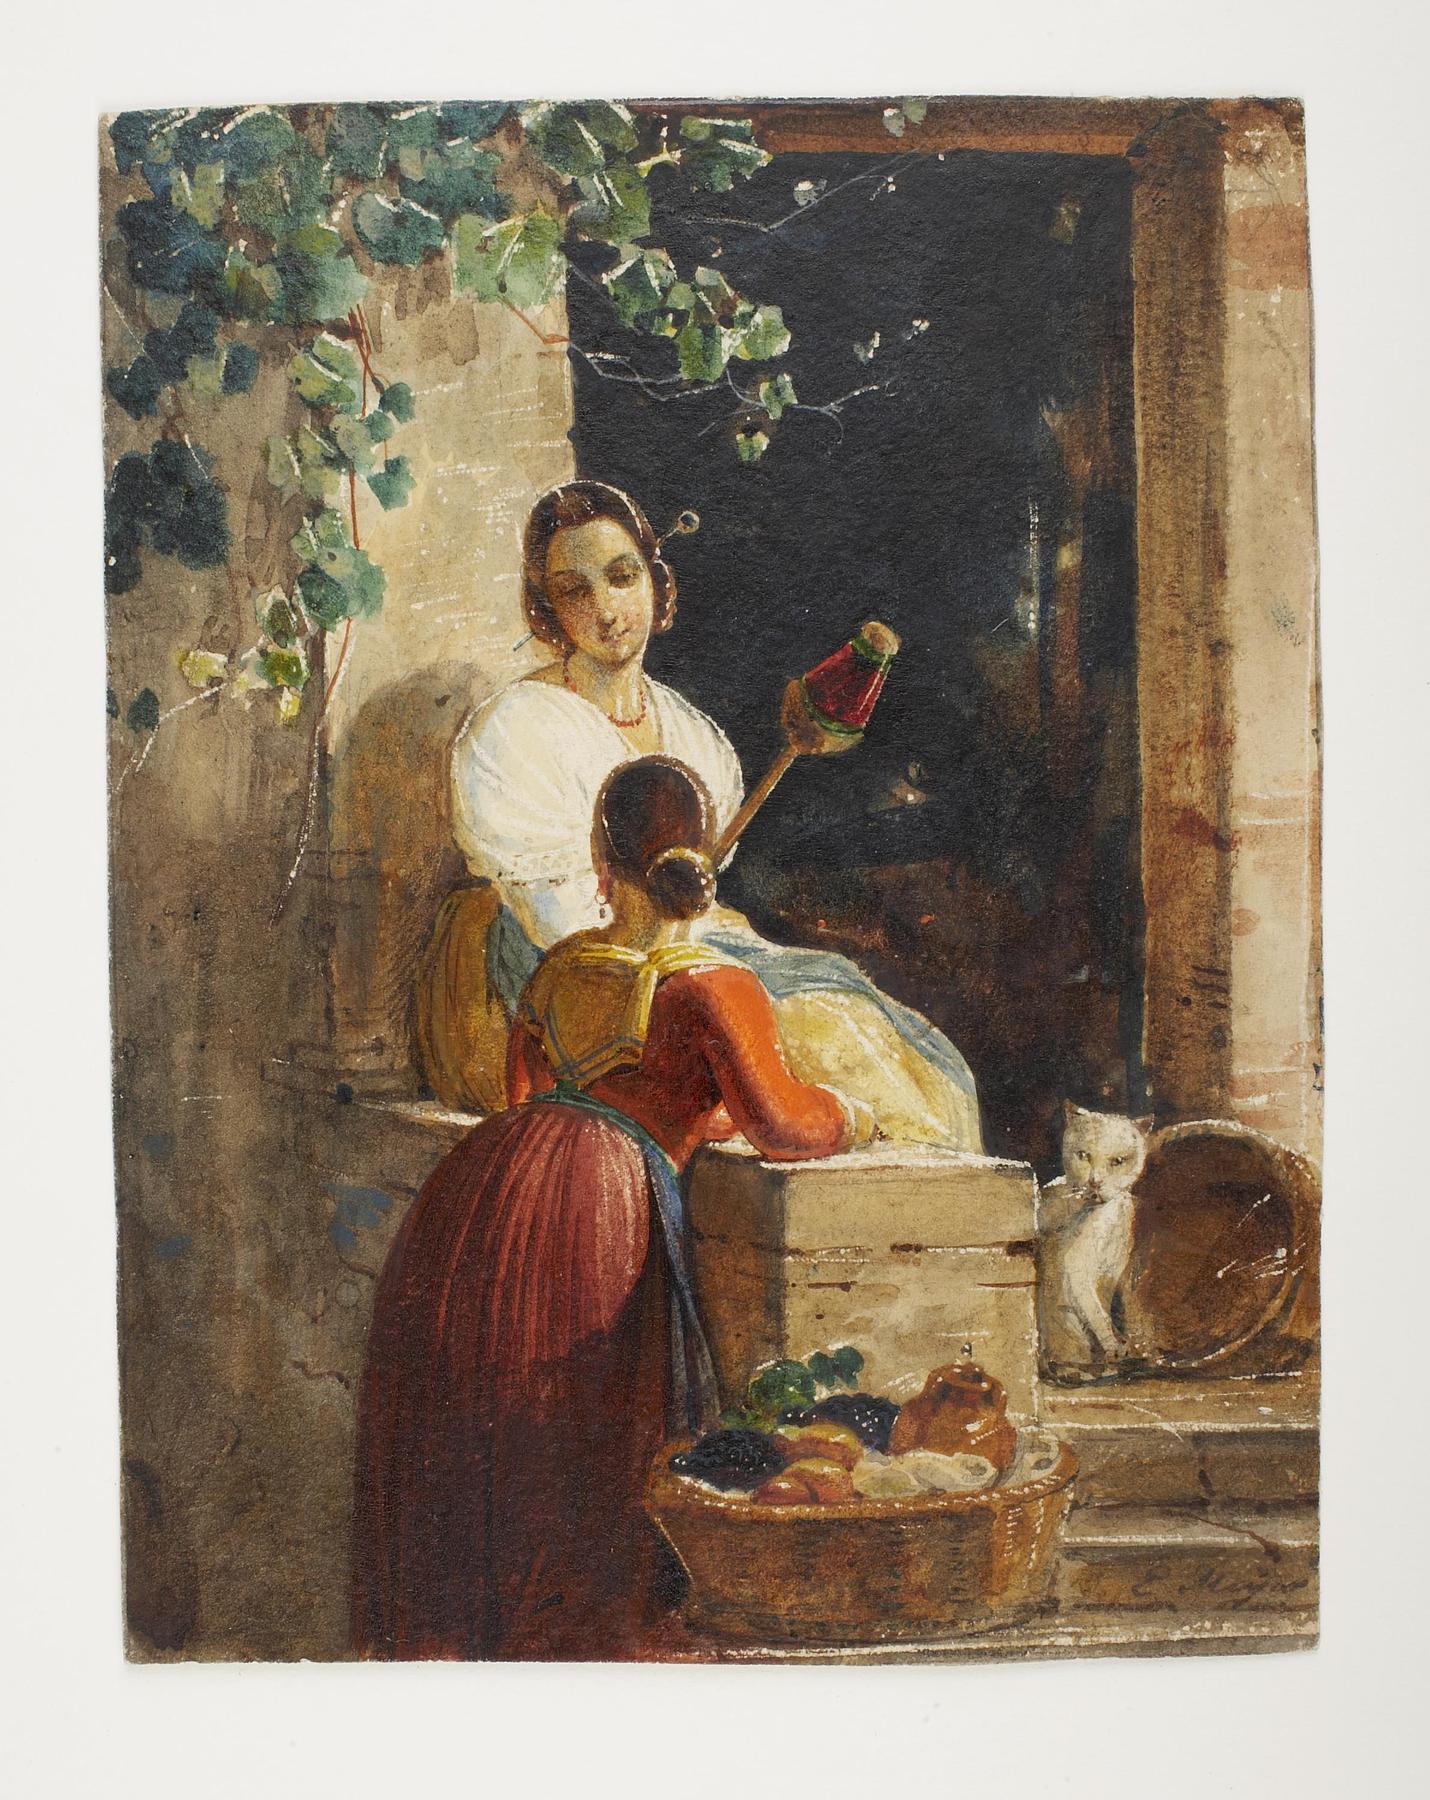 Two Italian Women at a Rural House, D849